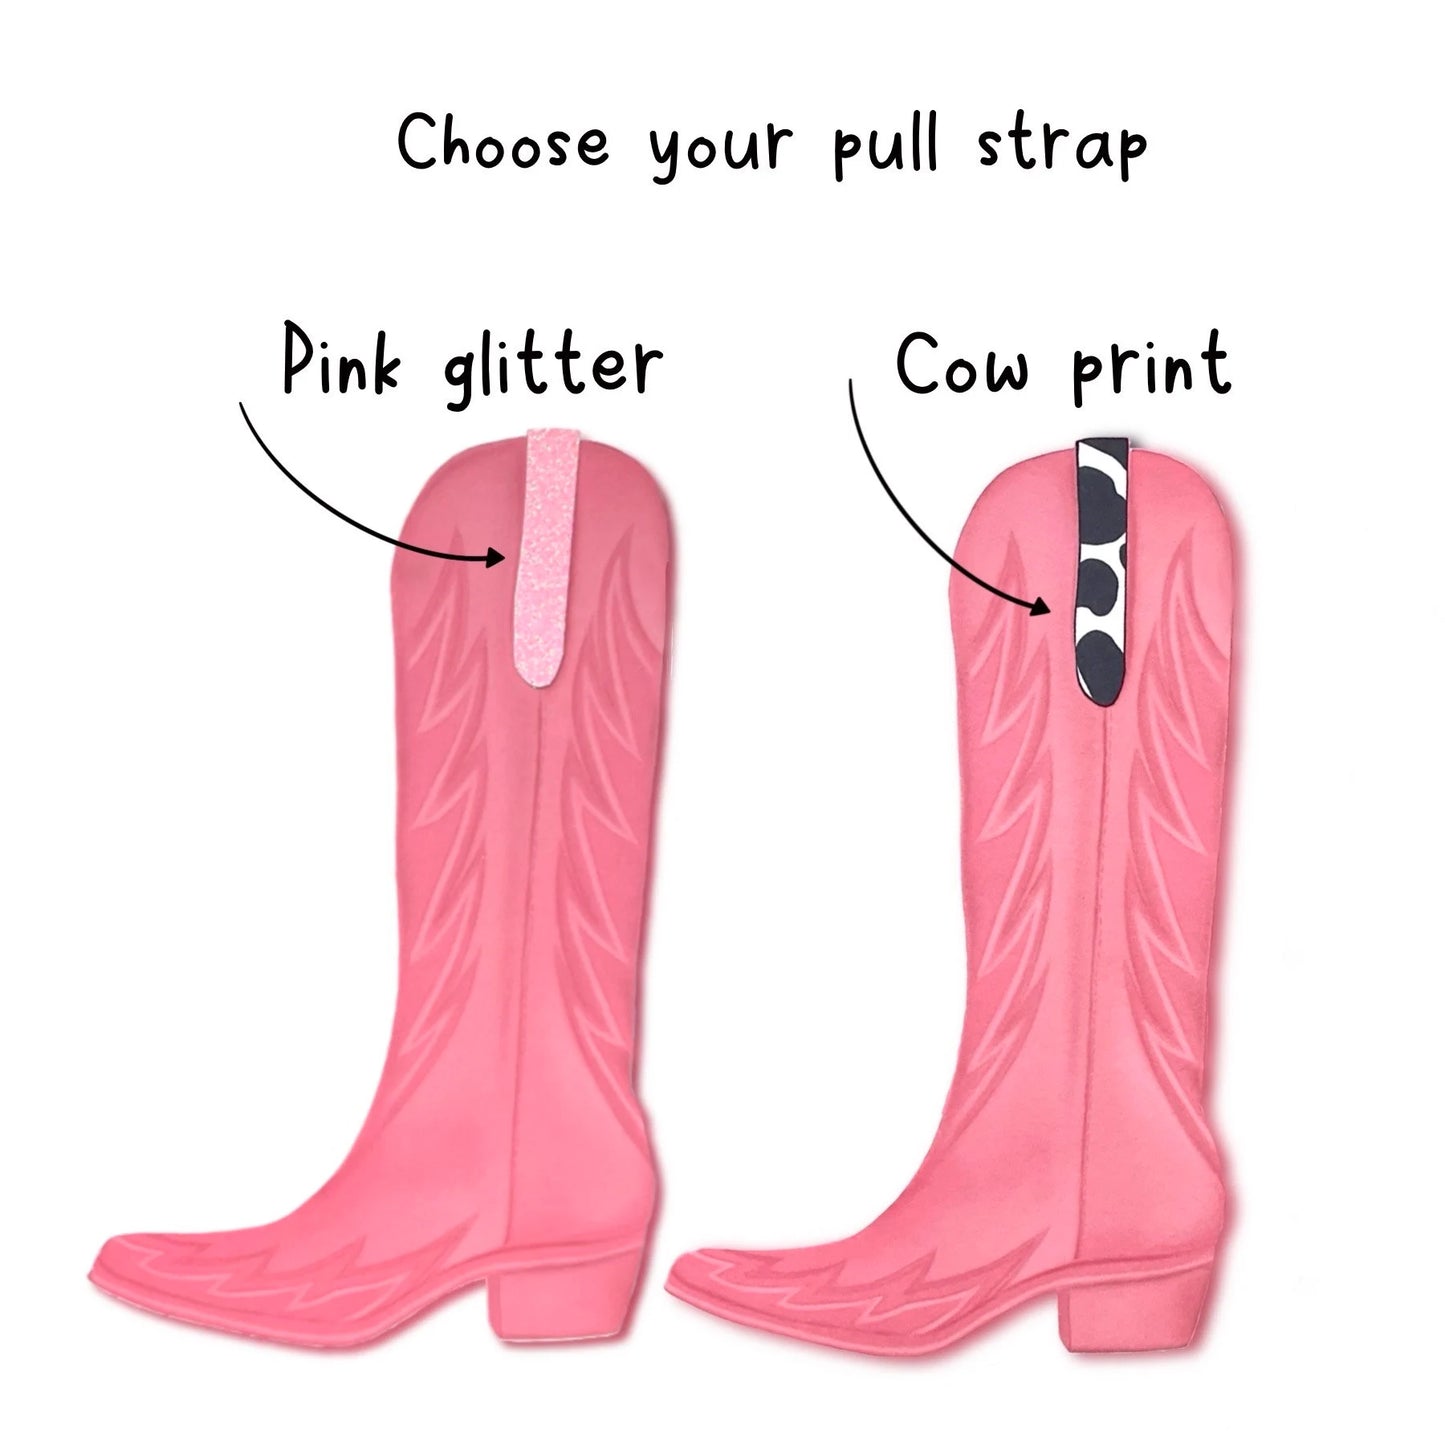 Pink cowboy boots decoration, Cowgirl boots southwestern decor, Customise your boot pull strap, Pink glitter or cow print pattern